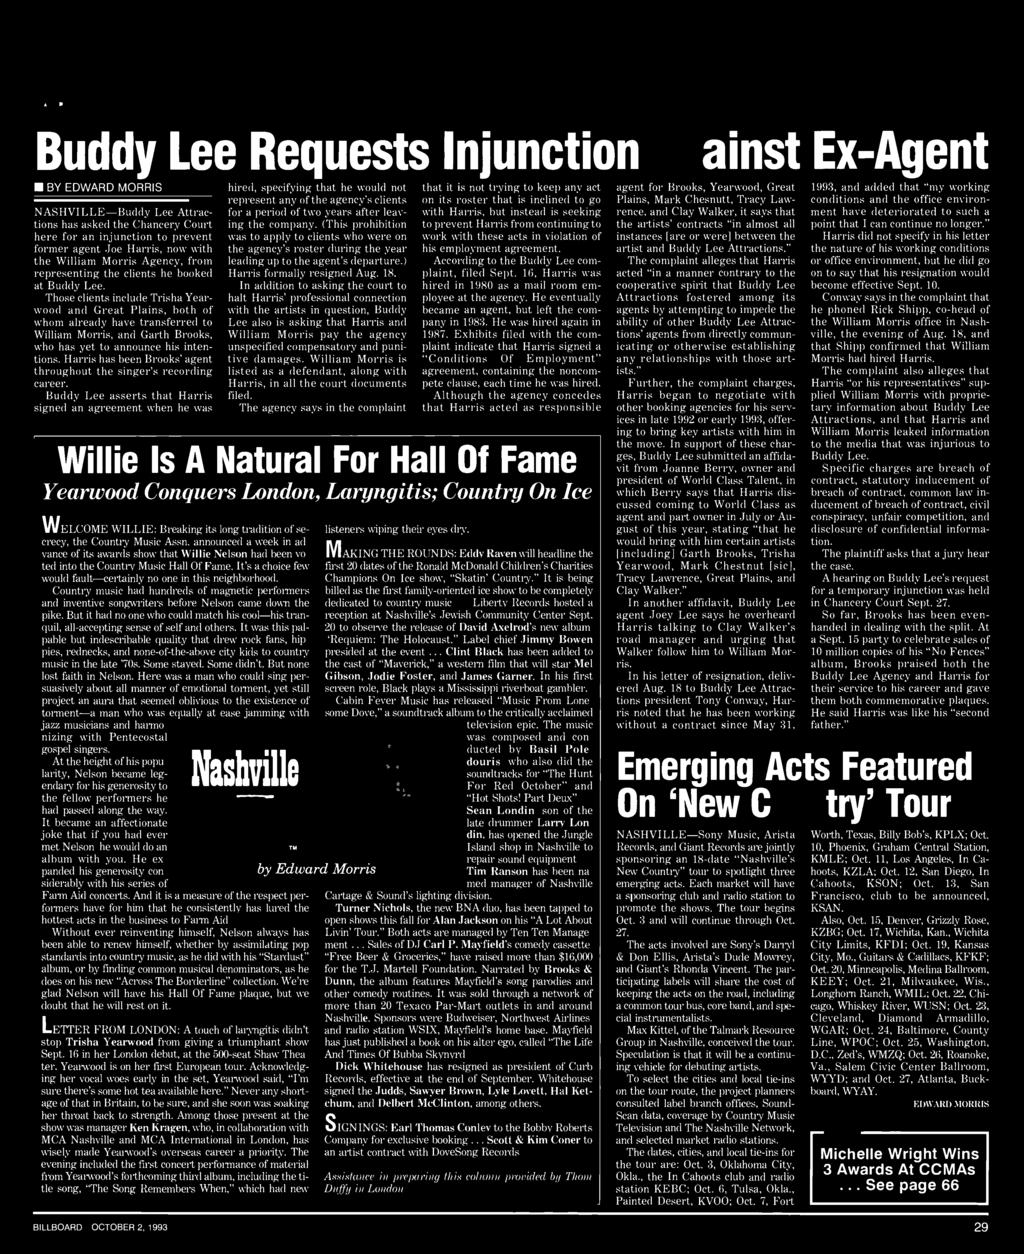 ARTISTS & MUSIC Buddy Lee Requests Injunction Against Ex -Agent BY EDWARD MORRIS NASHVILLE -Buddy Lee Attractions has asked the Chancery Court here for an injunction to prevent former agent Joe